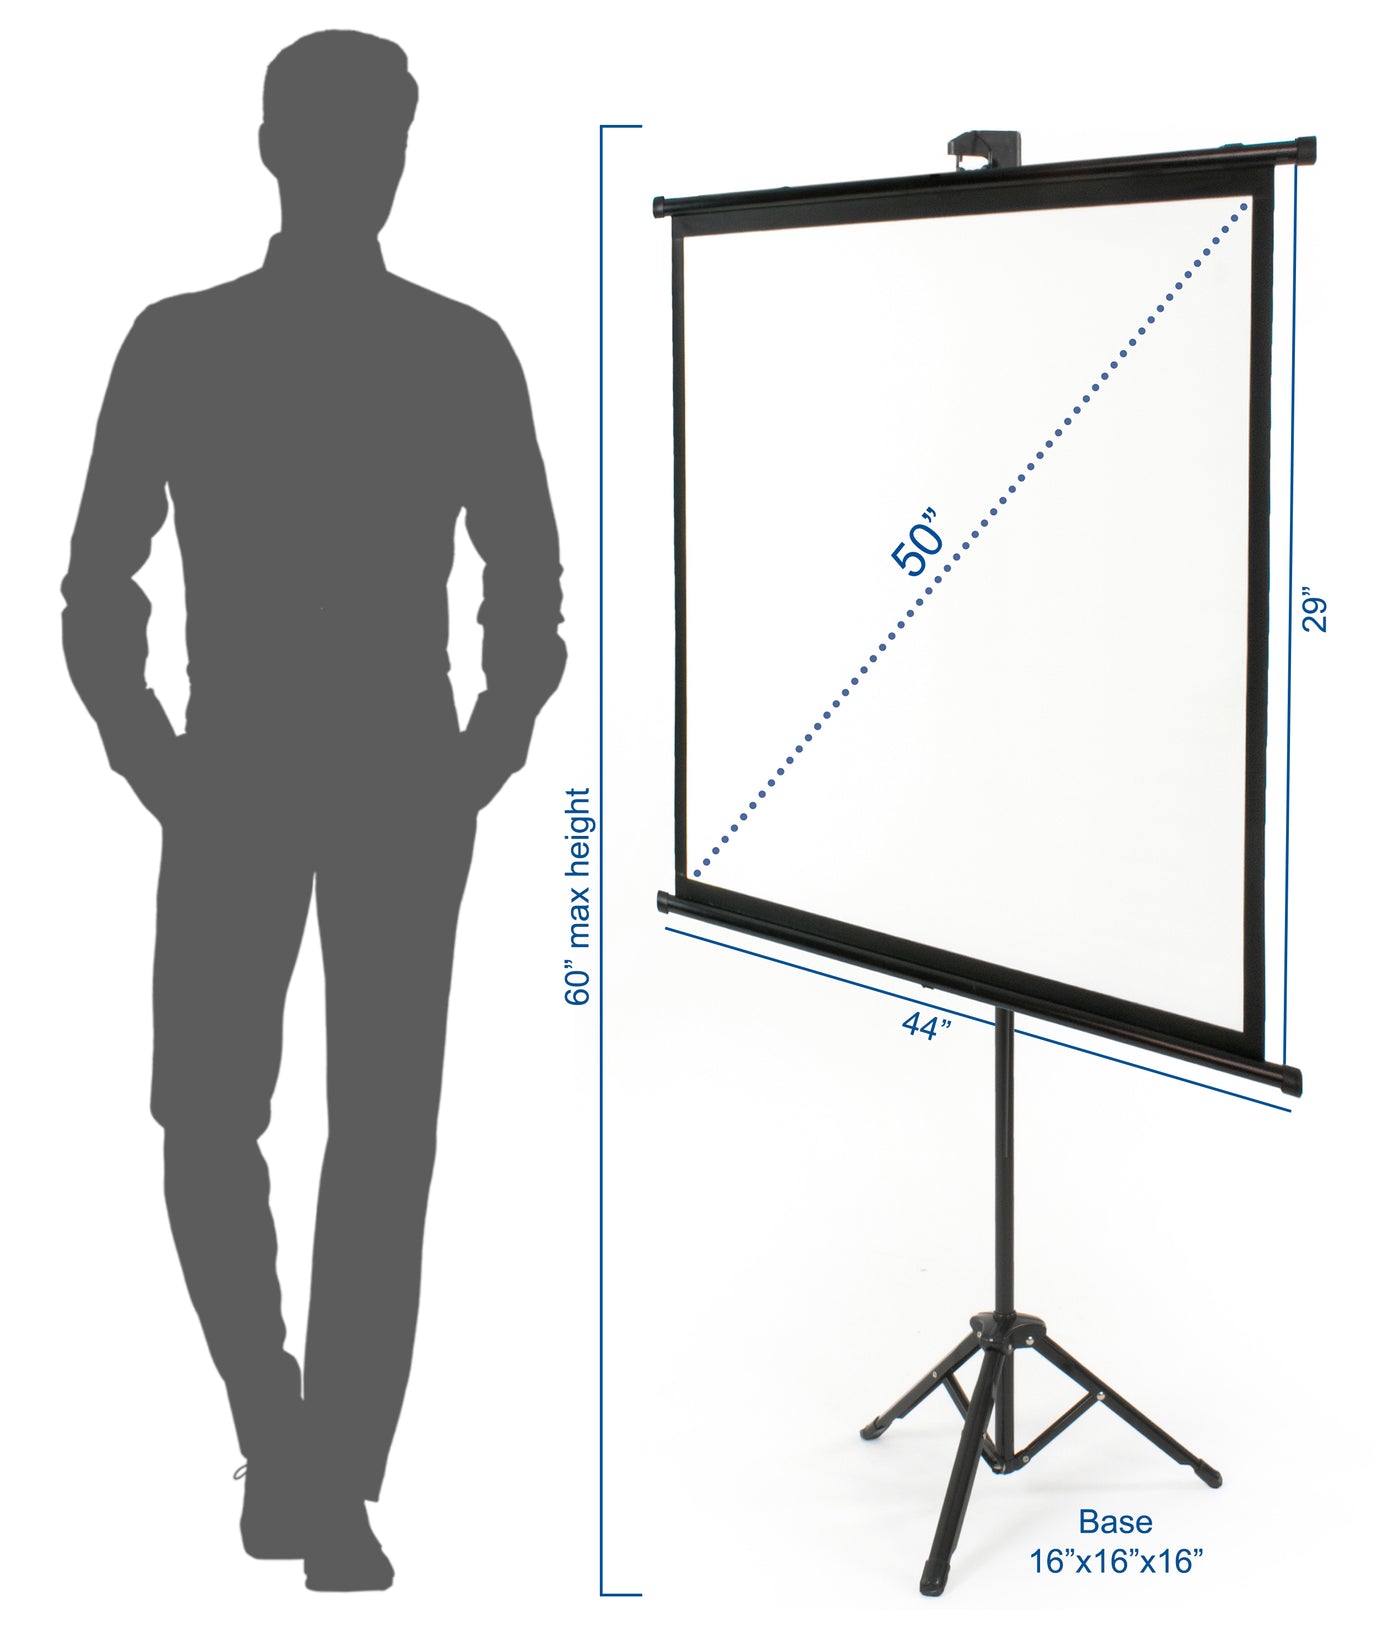 The height of a person compared to the height of the projector tripod screen for reference of size.